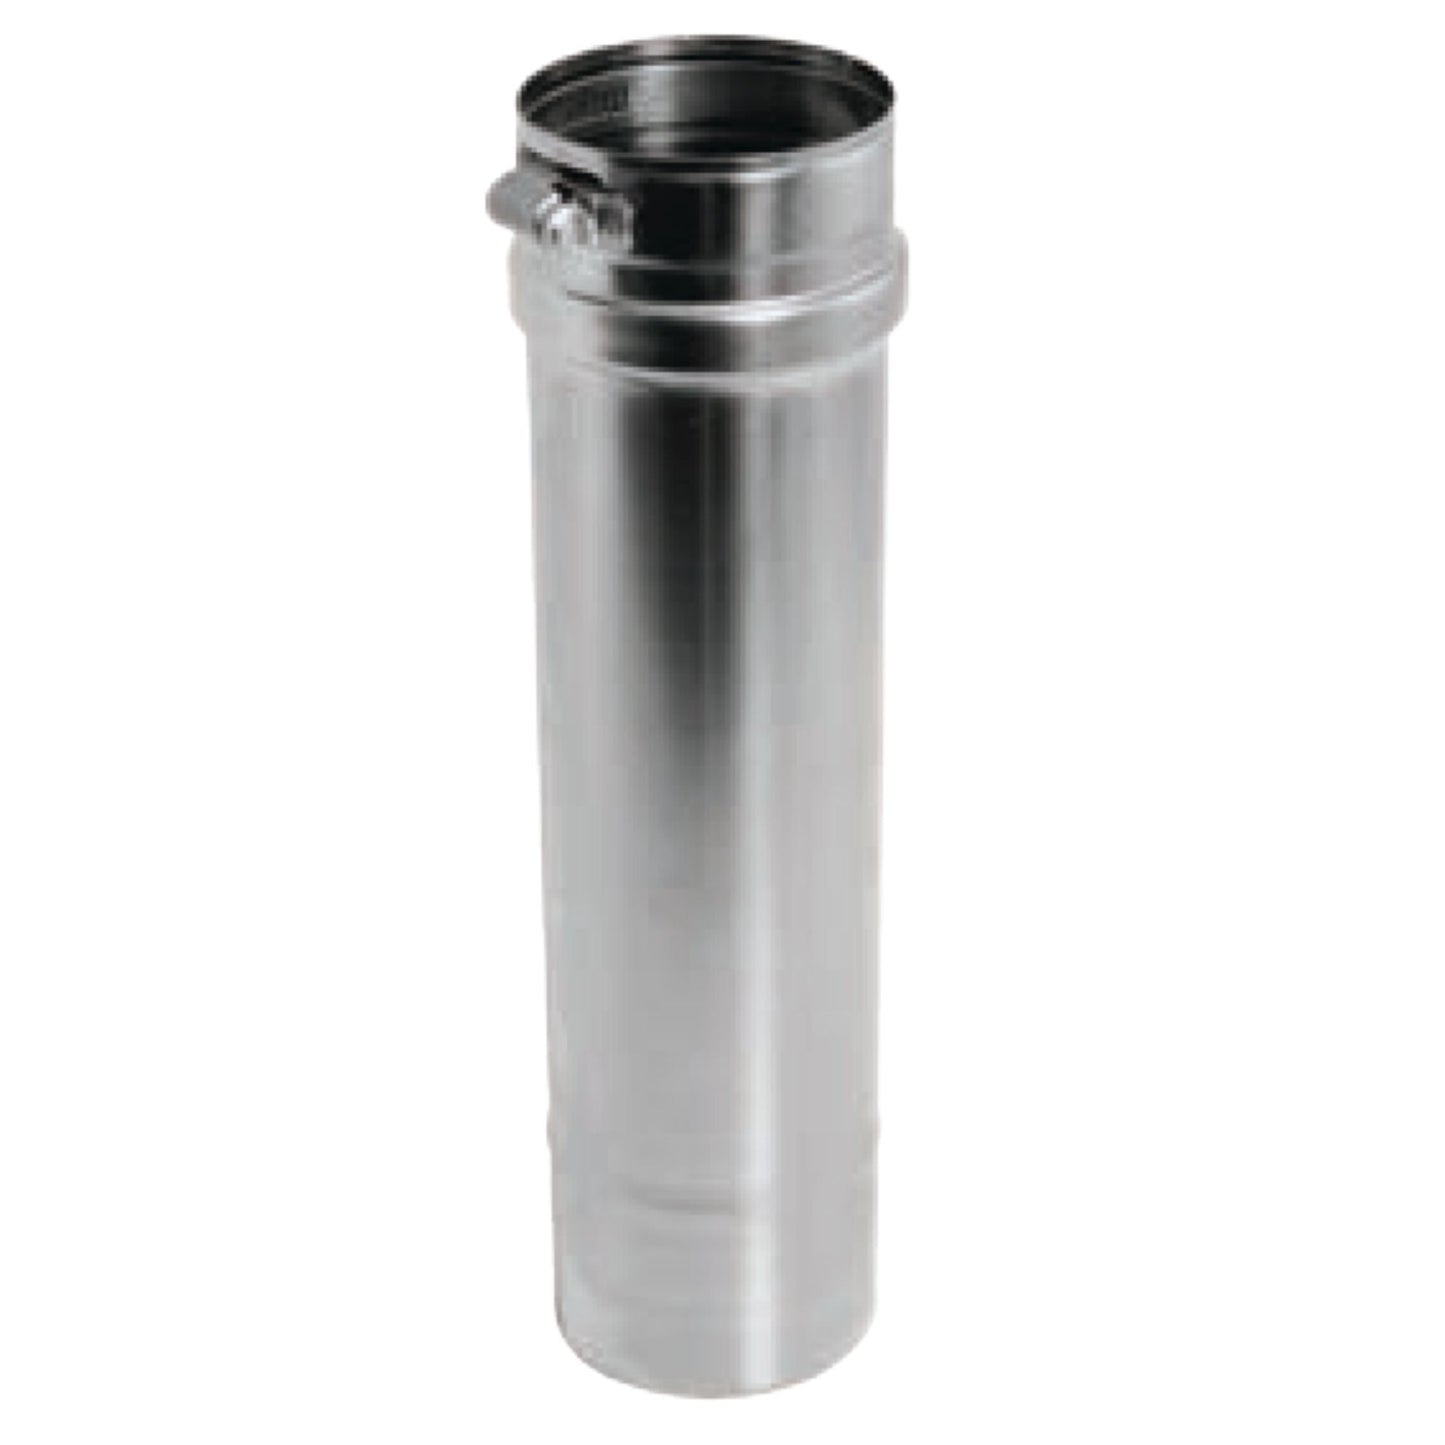 DuraVent FasNSeal 8" x 48" 316L Stainless Steel Vent Length